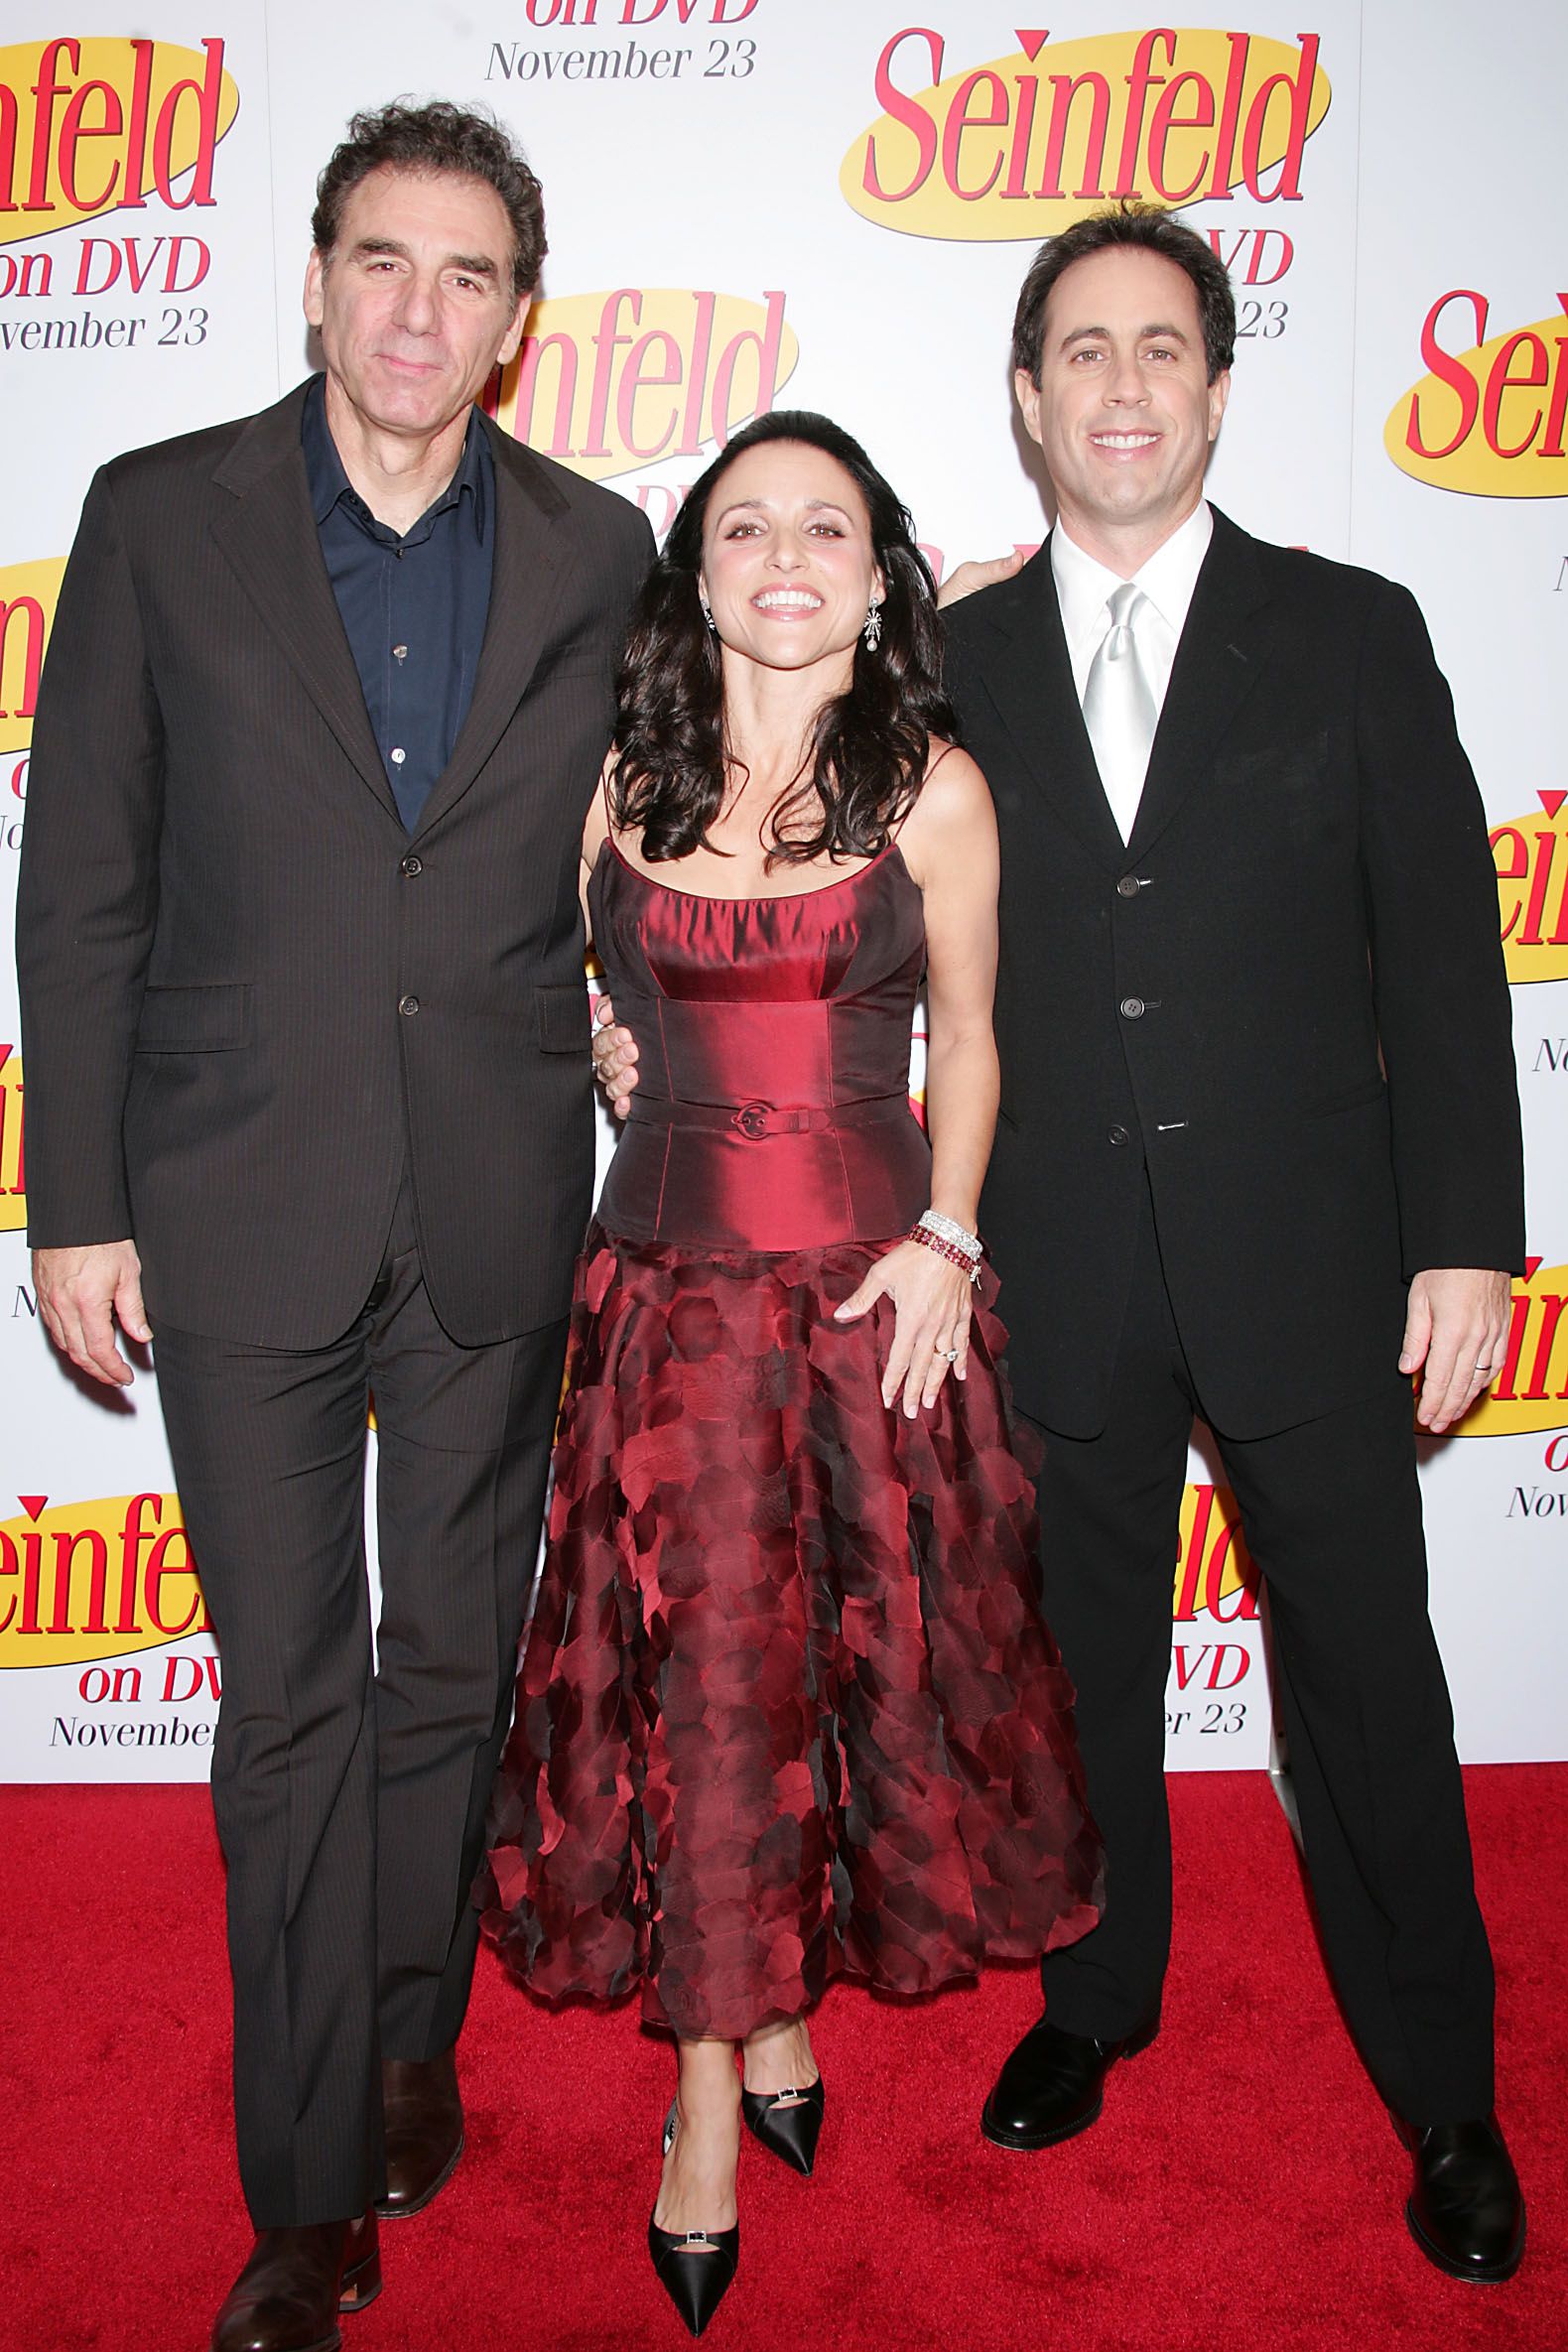  Jerry Seinfeld, Julia Louis-Dreyfus and Michael Richards celebrate the release of "Seinfeld" on DVD. 